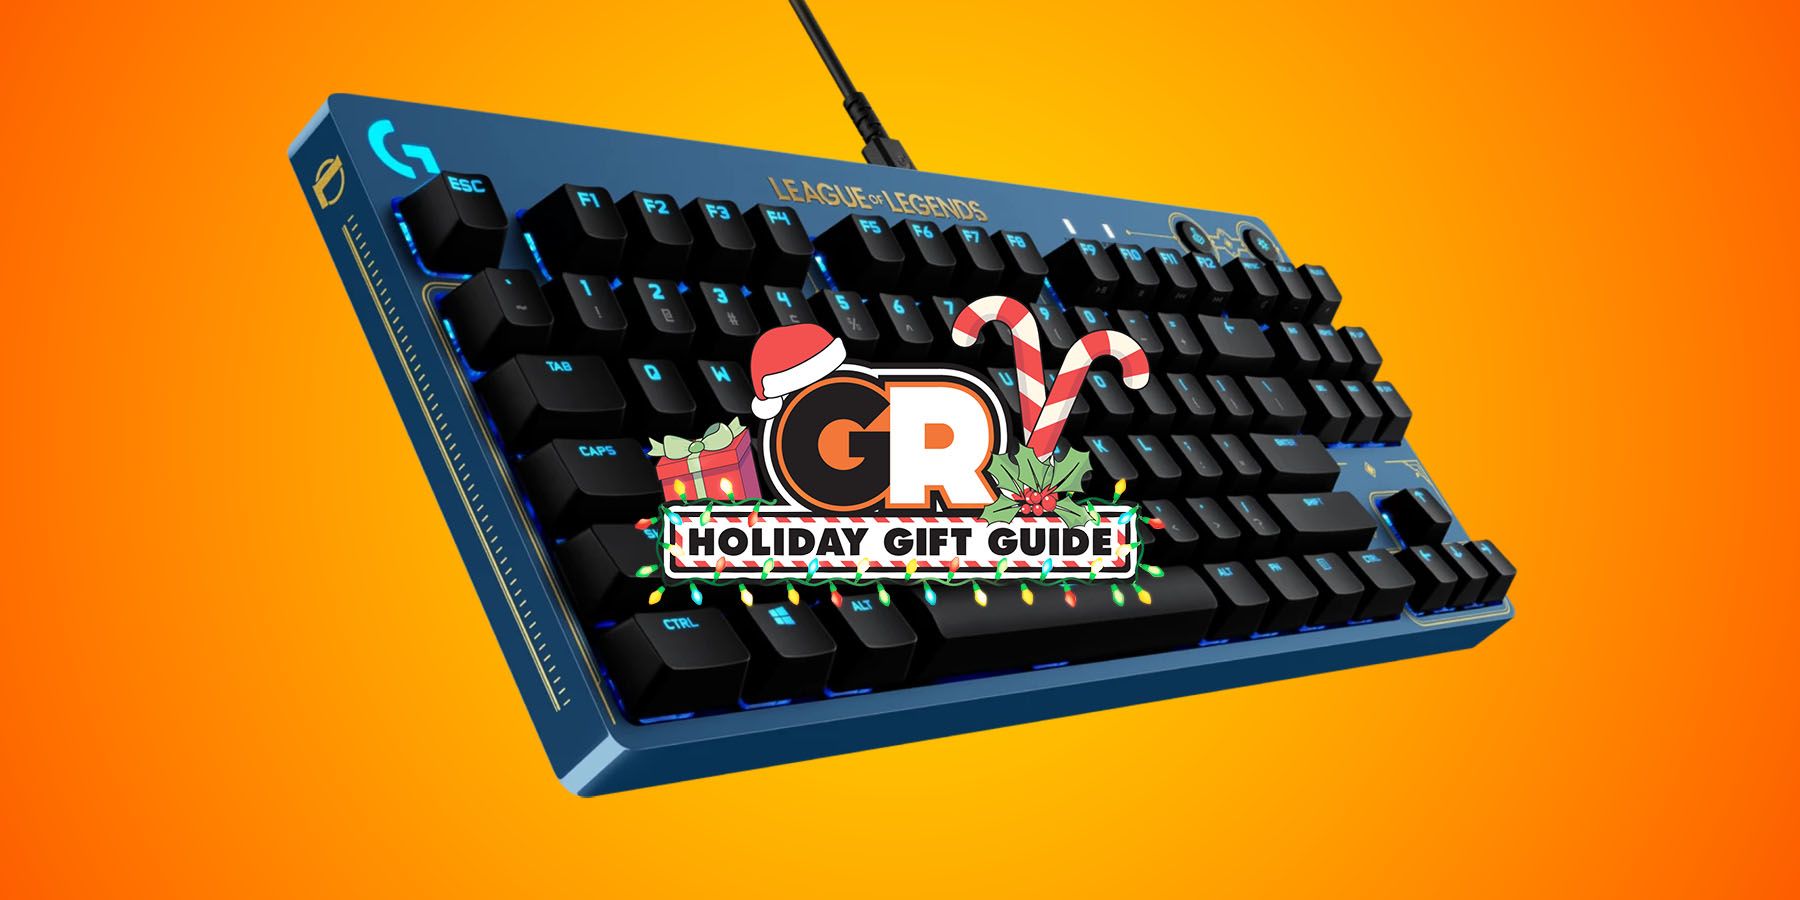 Logitech G Pro LoL Edition Gaming Keyboard $59.99 For a Limited Time